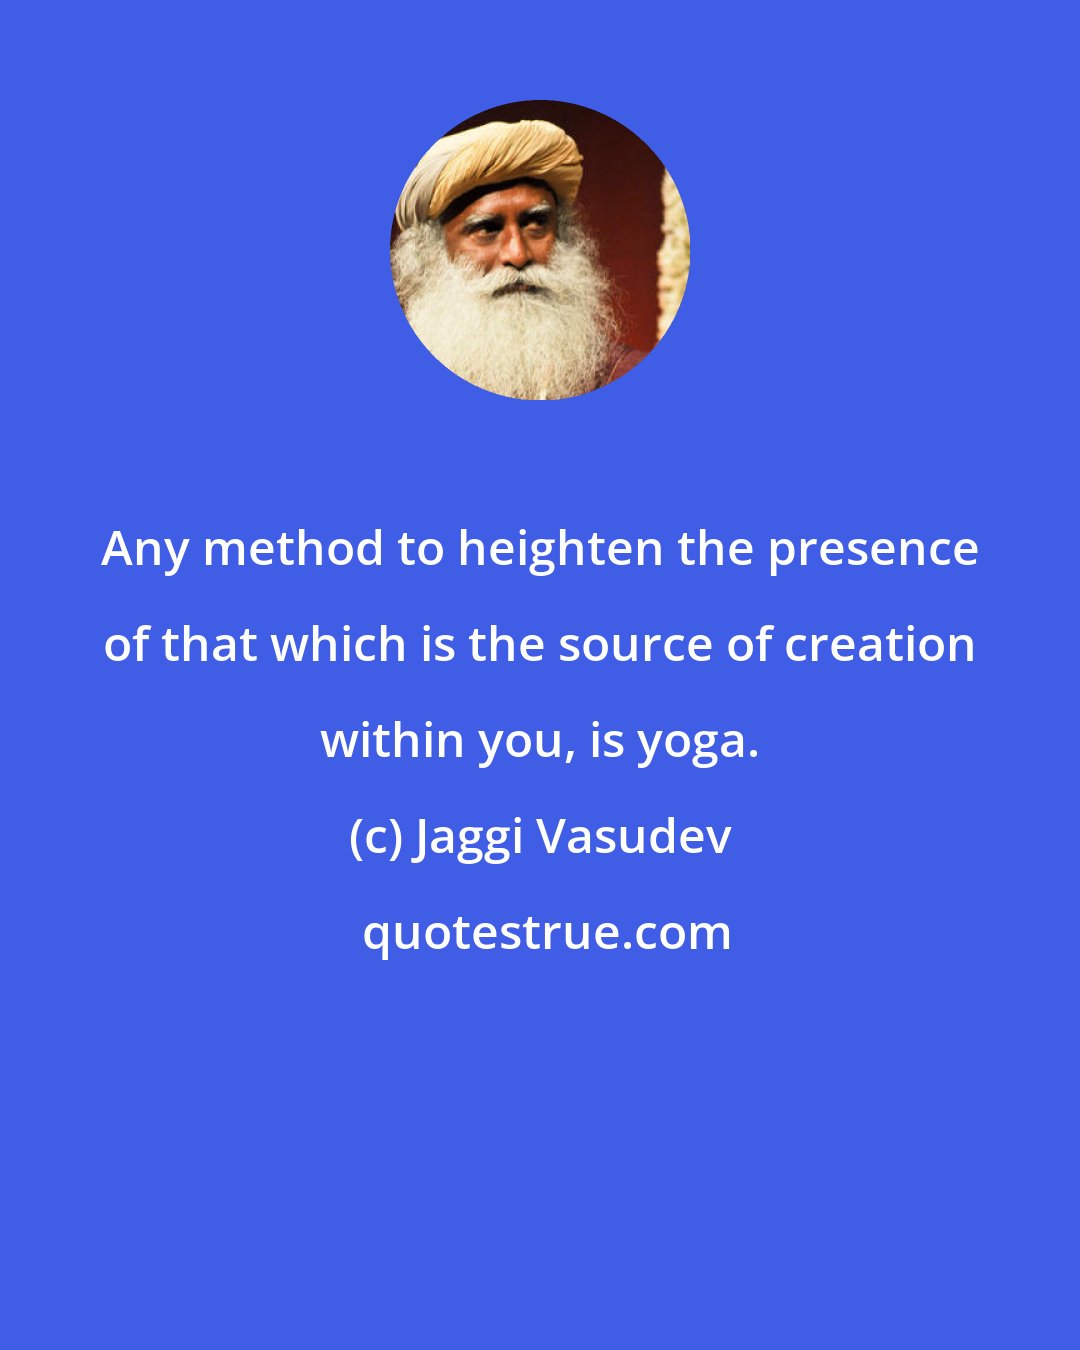 Jaggi Vasudev: Any method to heighten the presence of that which is the source of creation within you, is yoga.